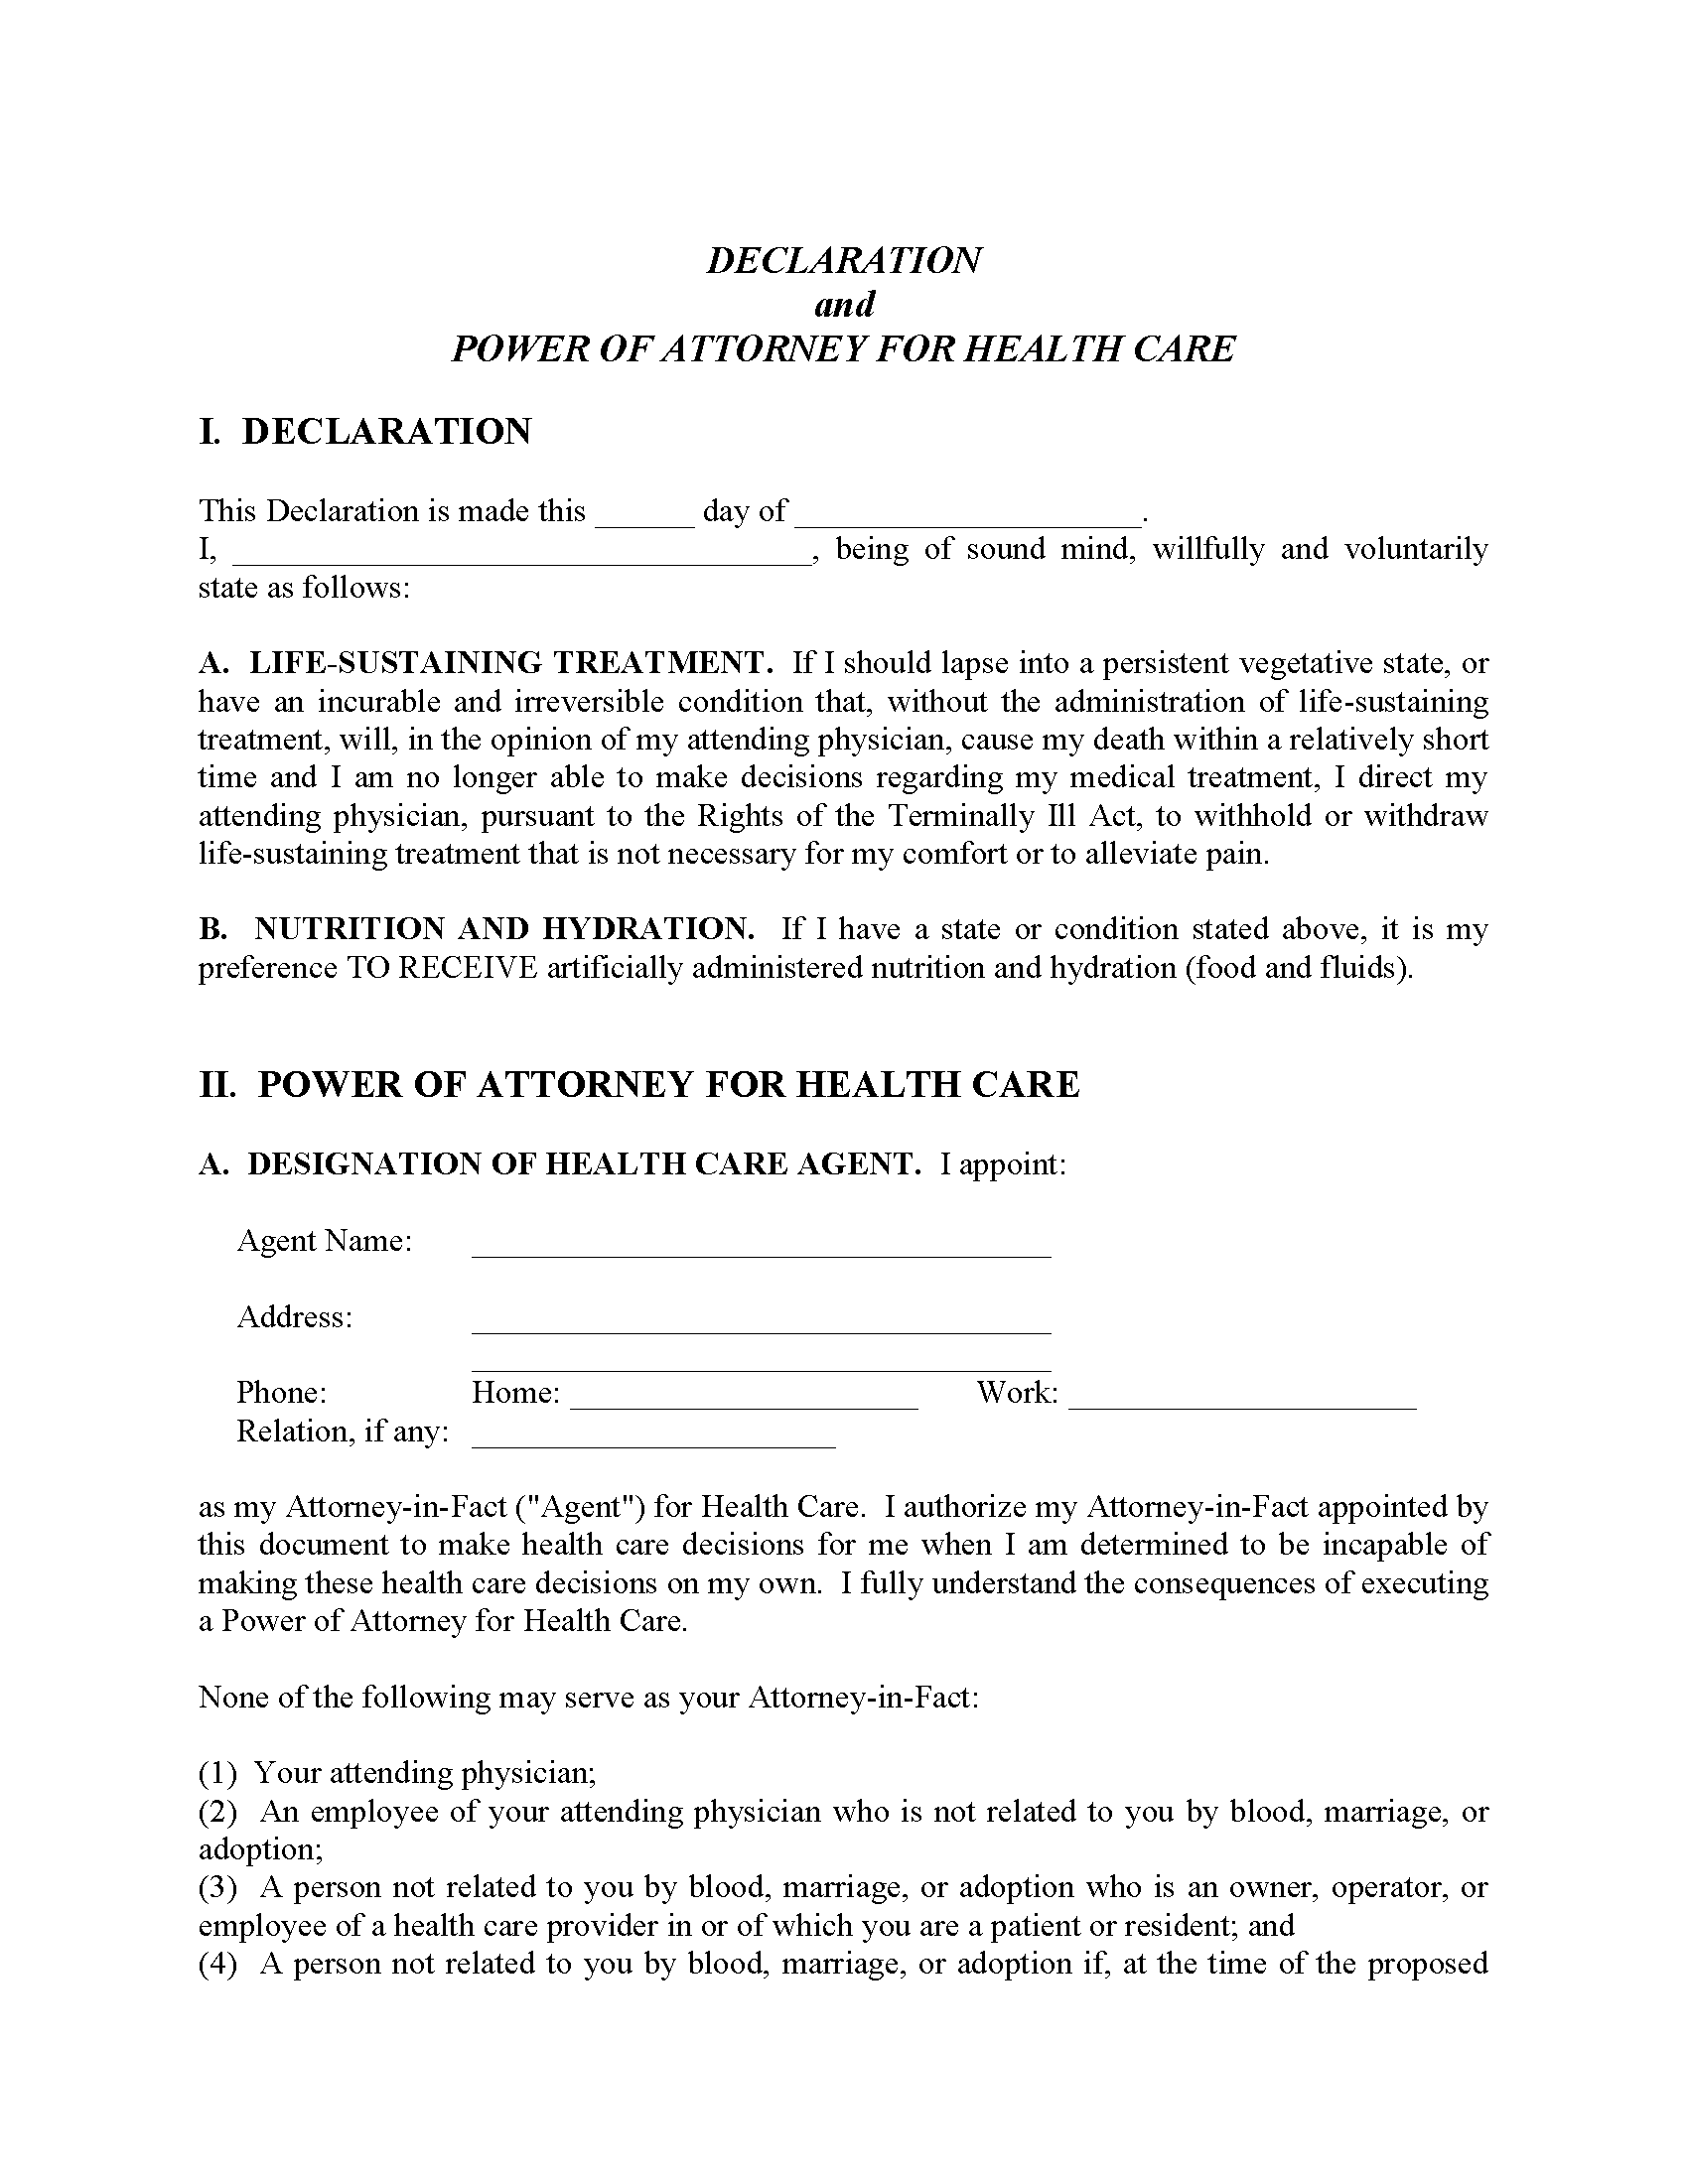 arkansas-living-will-form-free-printable-legal-forms